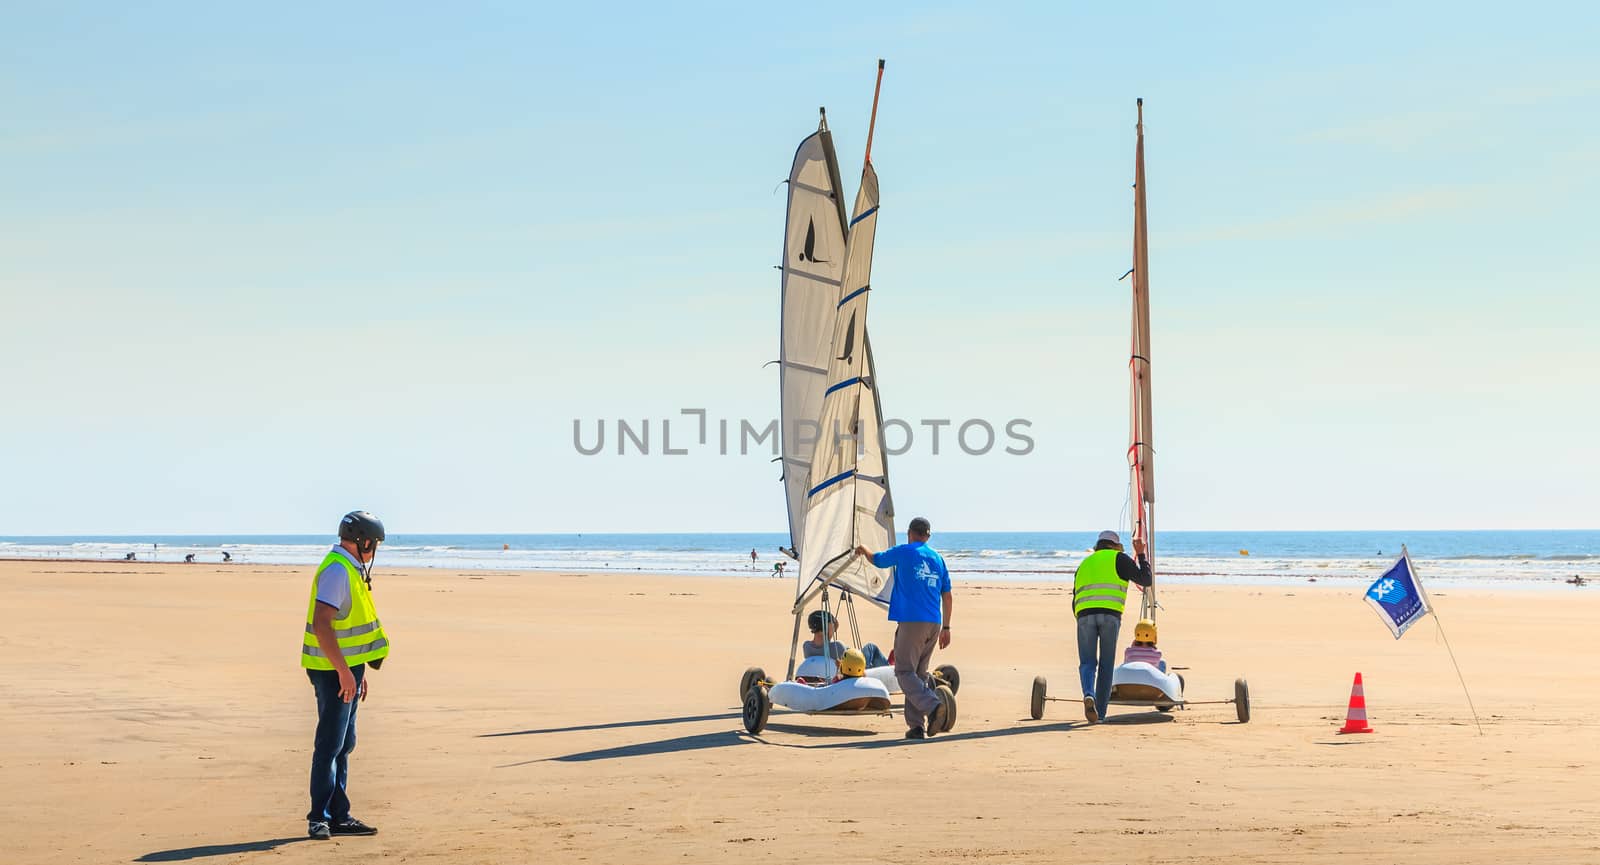 trainer gives a lesson of sand yachting by AtlanticEUROSTOXX